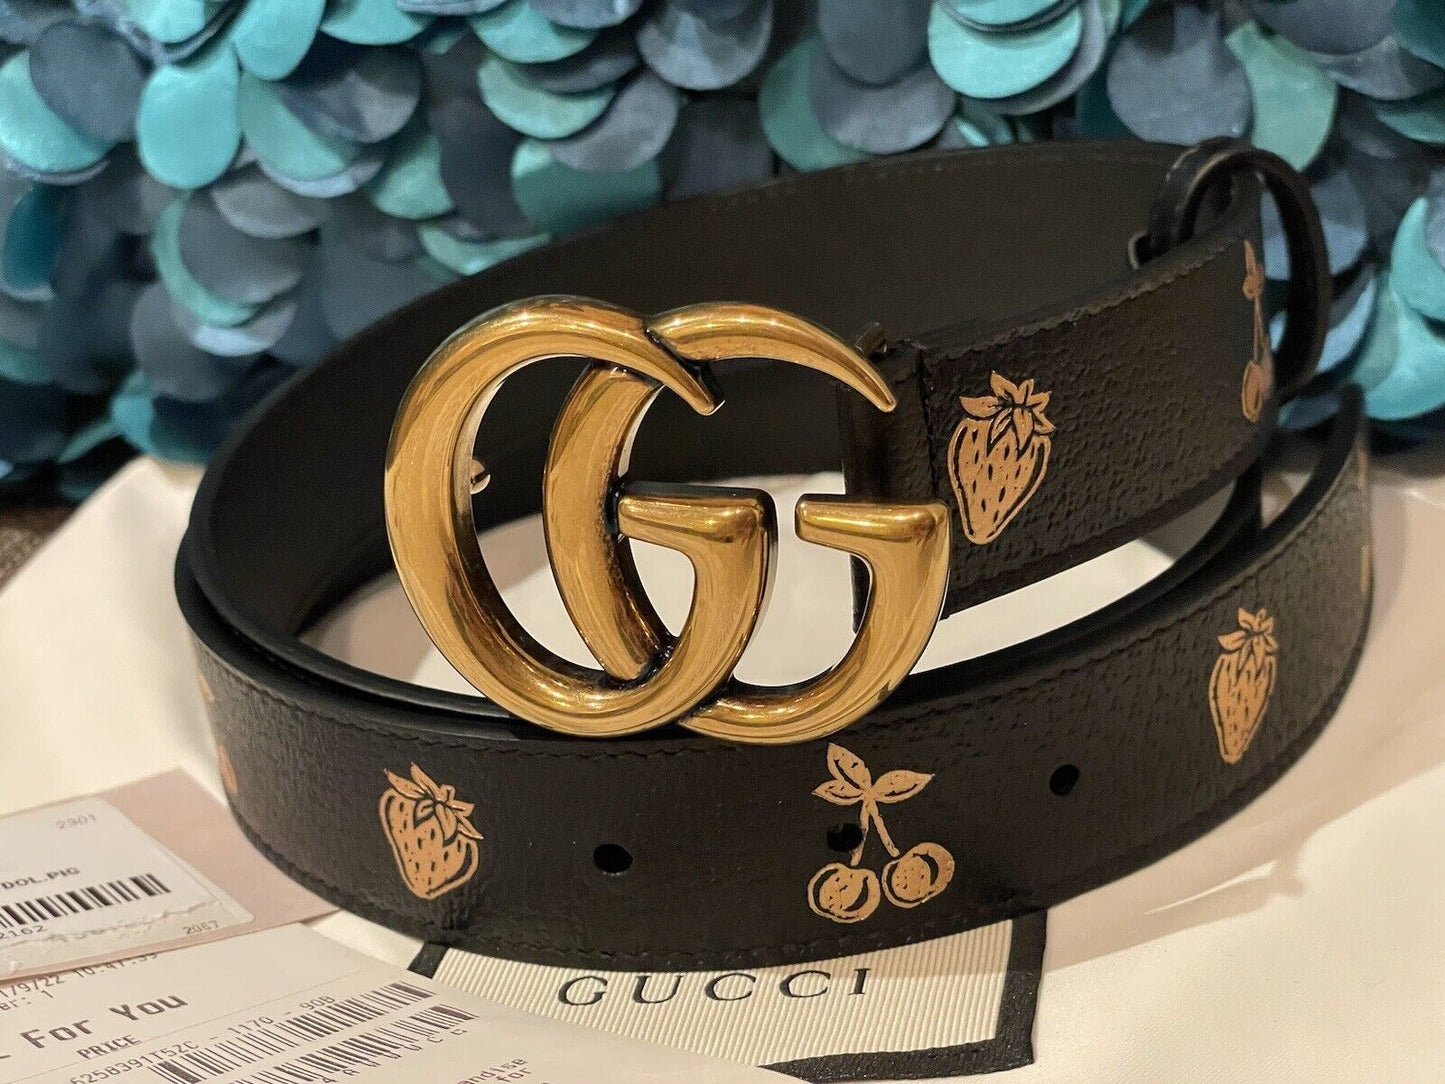 NWT Gucci Leather Belt Black GG belt. Size 90/36 Style 625839 Limited Edition